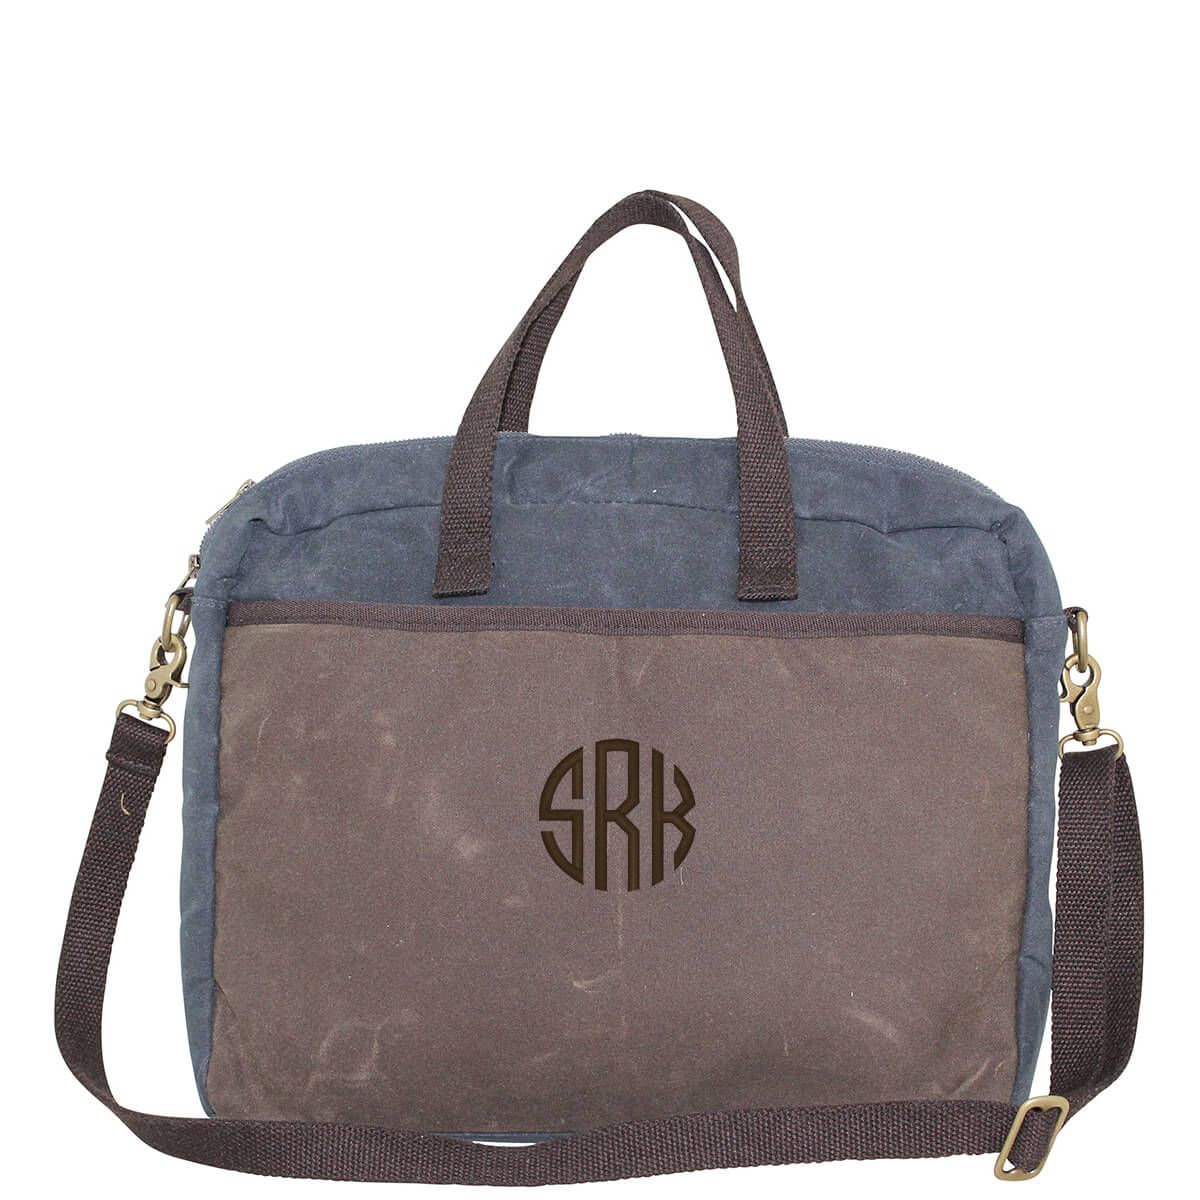 Monogrammed Waxed Canvas Laptop Bag Case Luggage Tote Bag Slate Blue